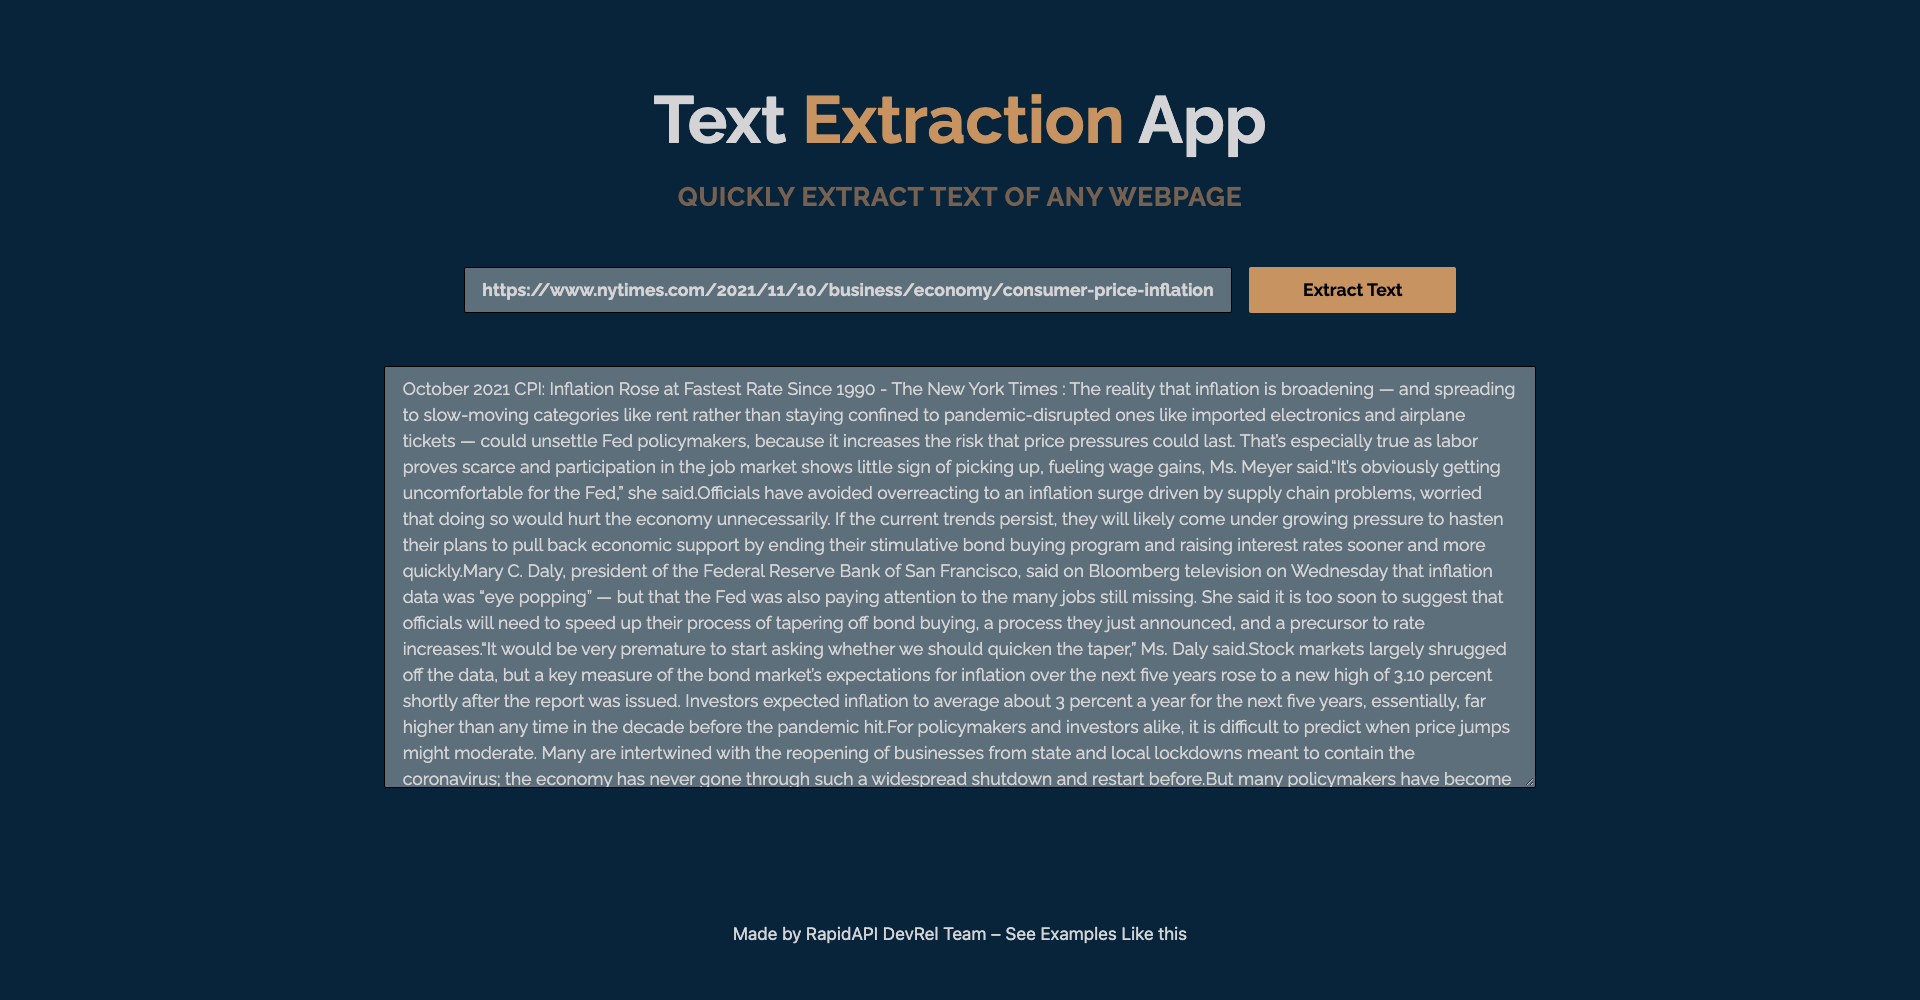 Text Extraction App built with Next.js and TextAPI